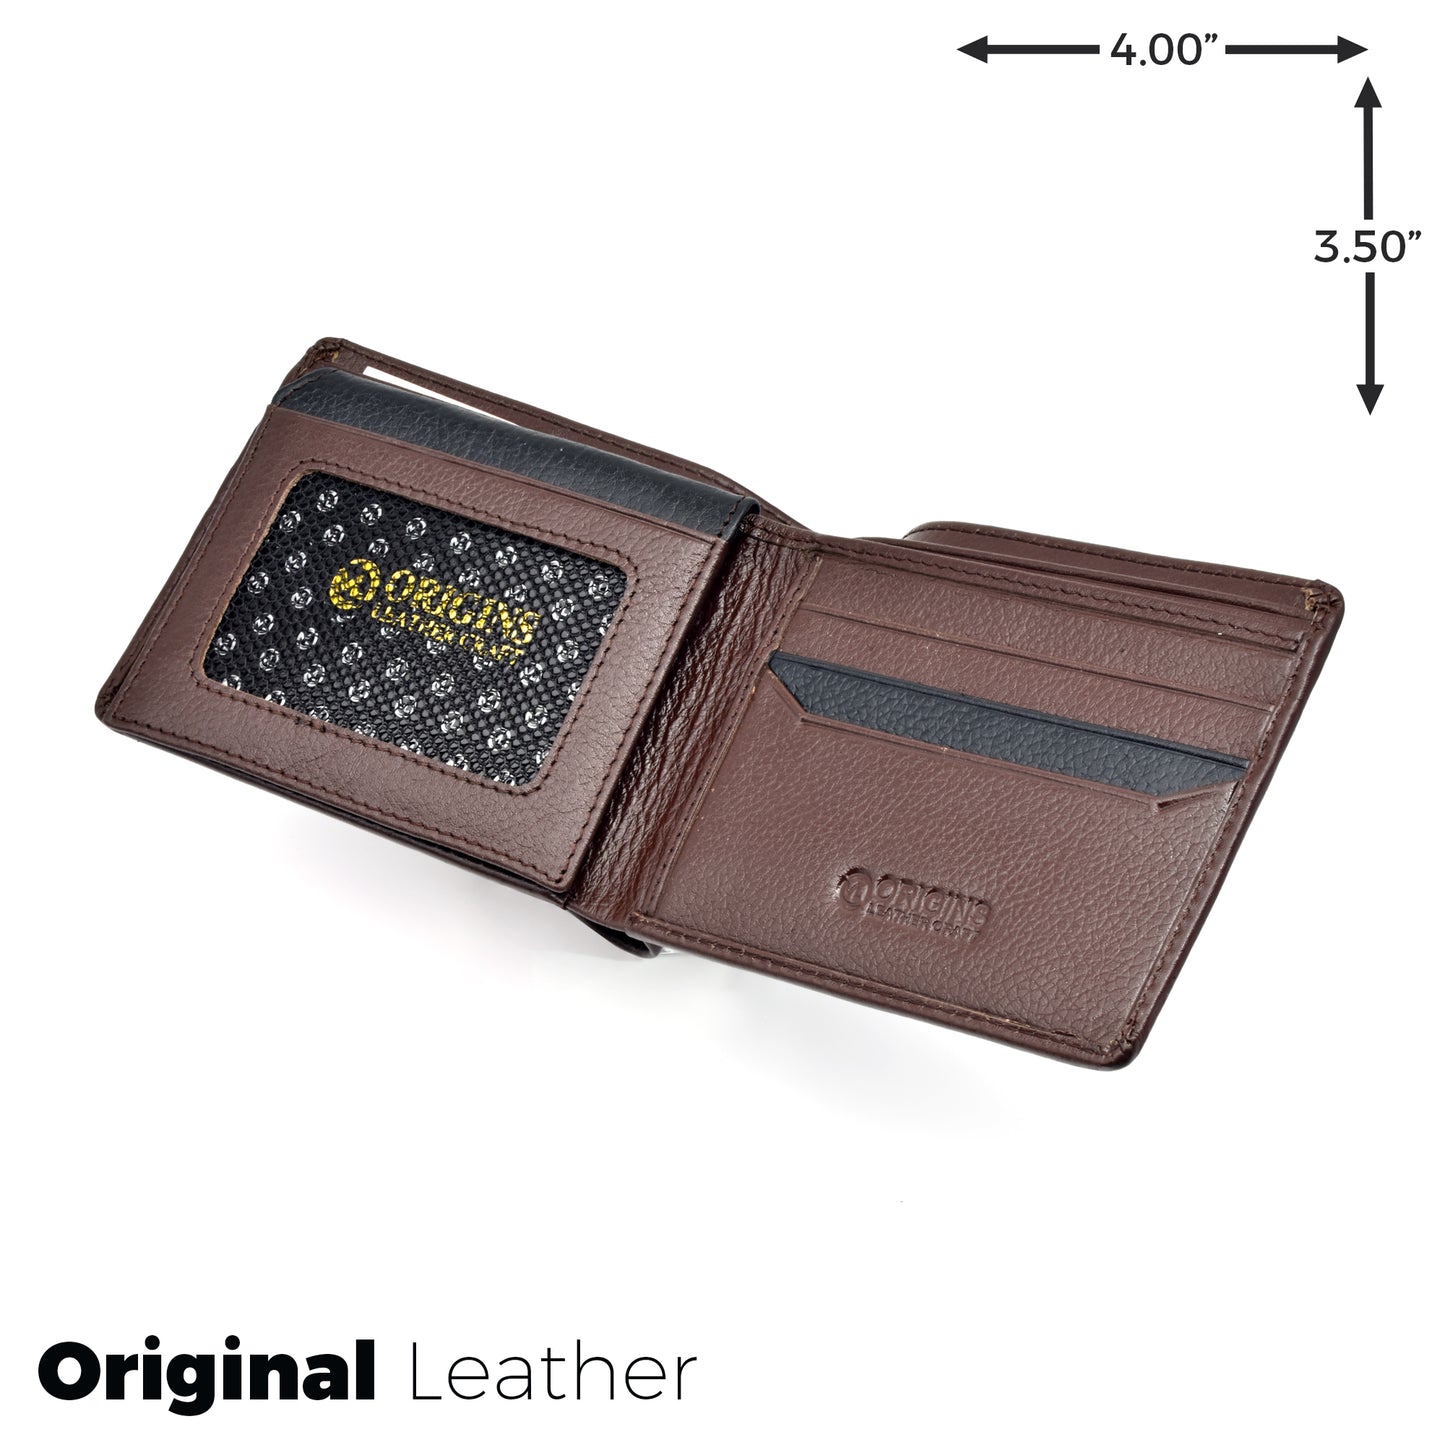 Small Size Premium Quality Leather Wallet | ORGN Wallet 17